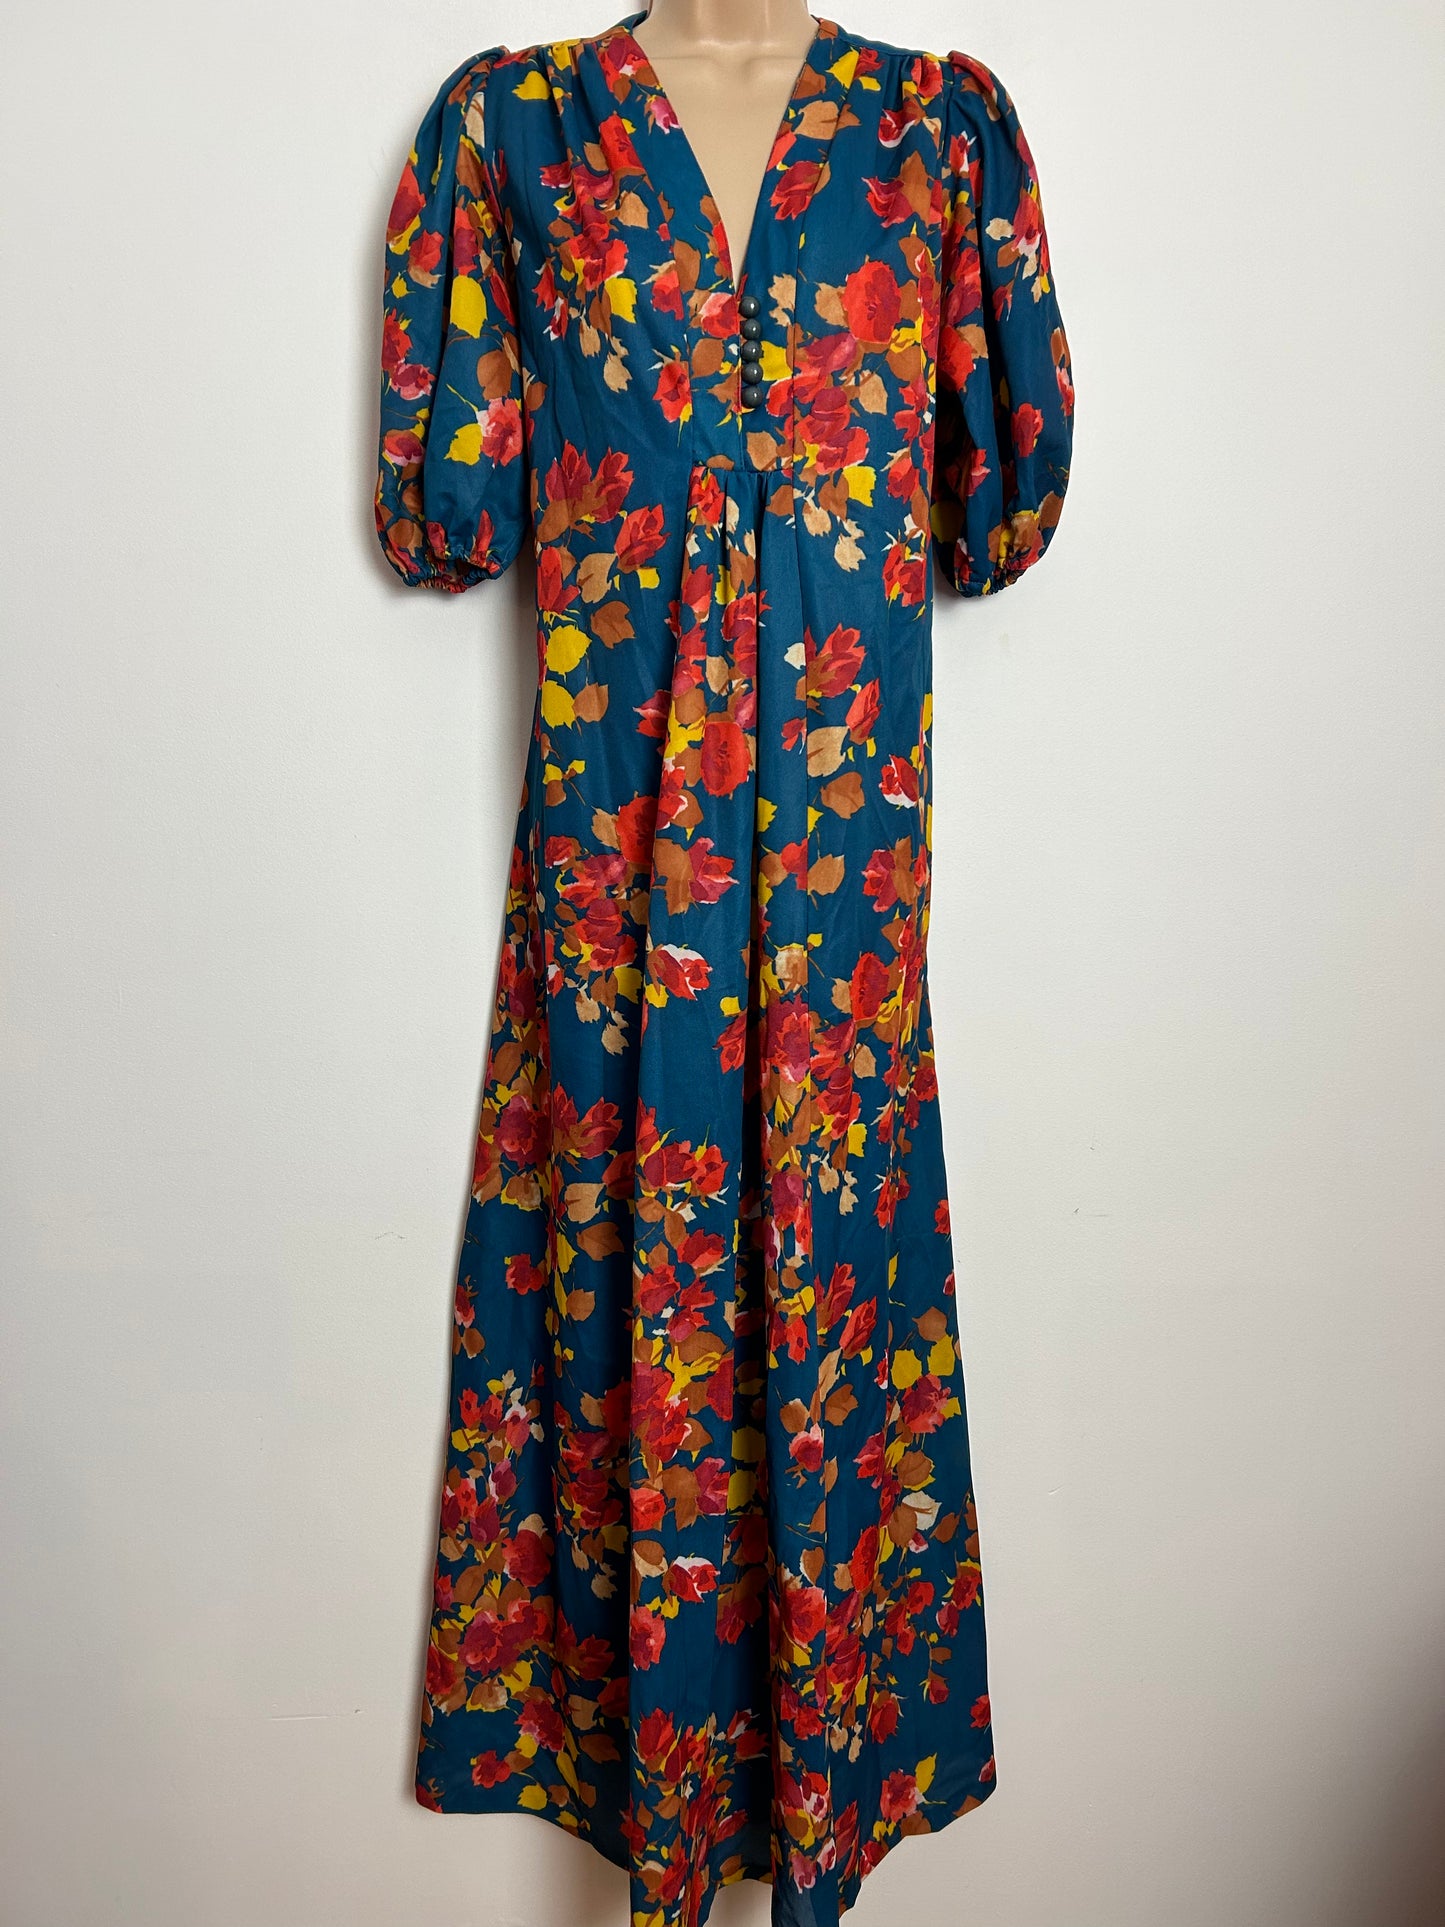 Vintage 1970s UK Size 12 Teal Red Mustard & Brown Floral Print Mid Sleeve Smock Style Boho Maxi Dress